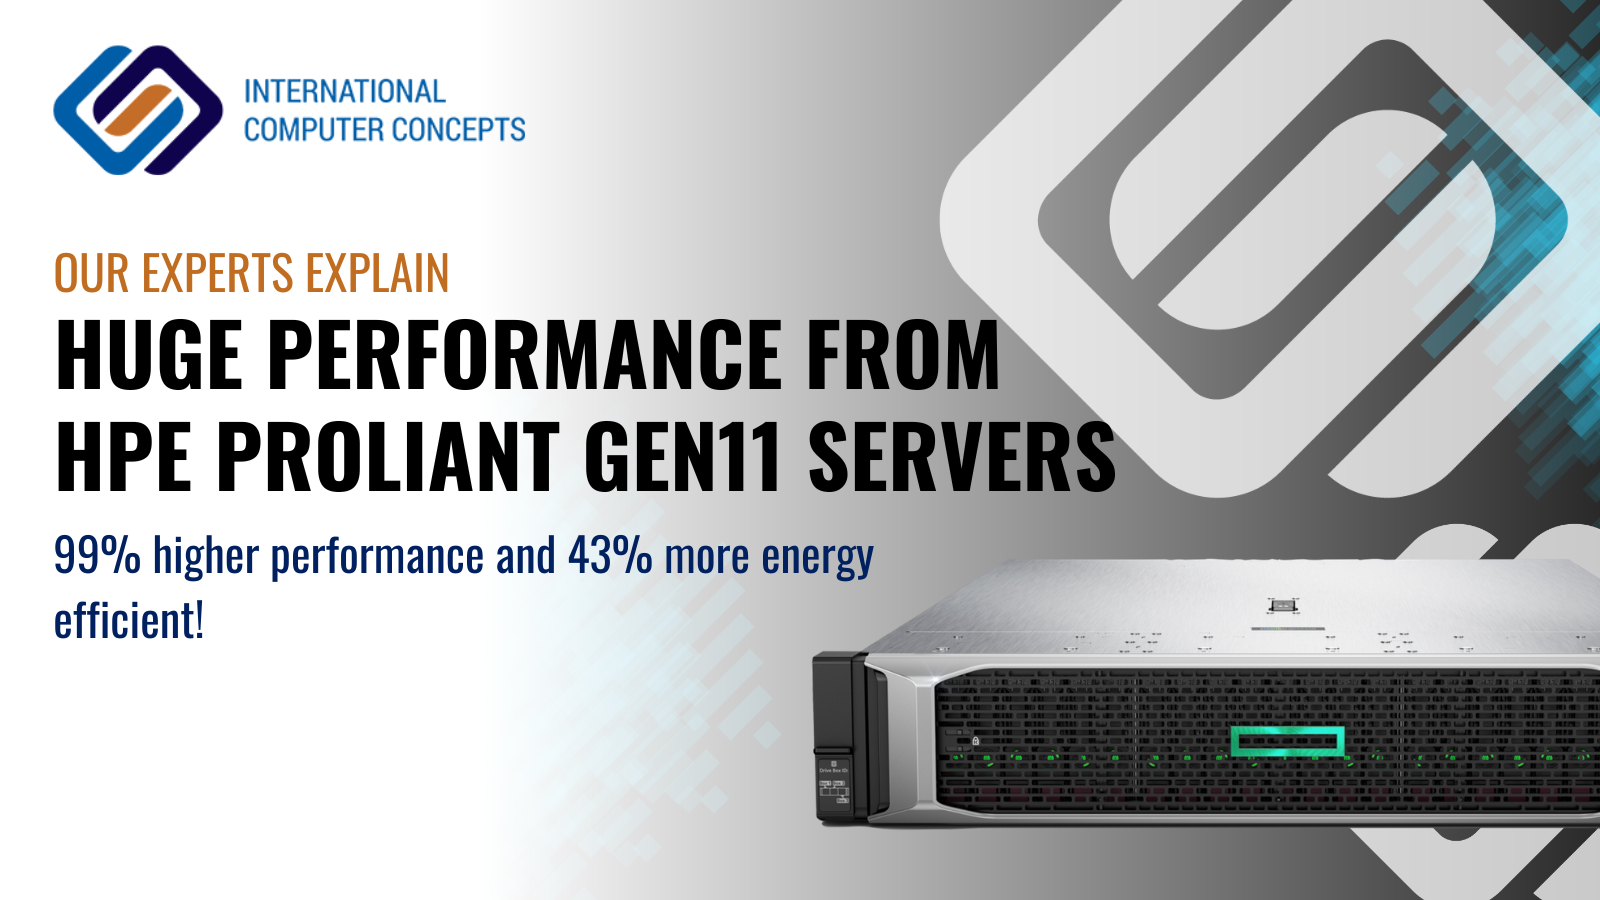 HPE claims their new ProLiant Gen11 servers have record-breaking performance with AMD EPYC 9004